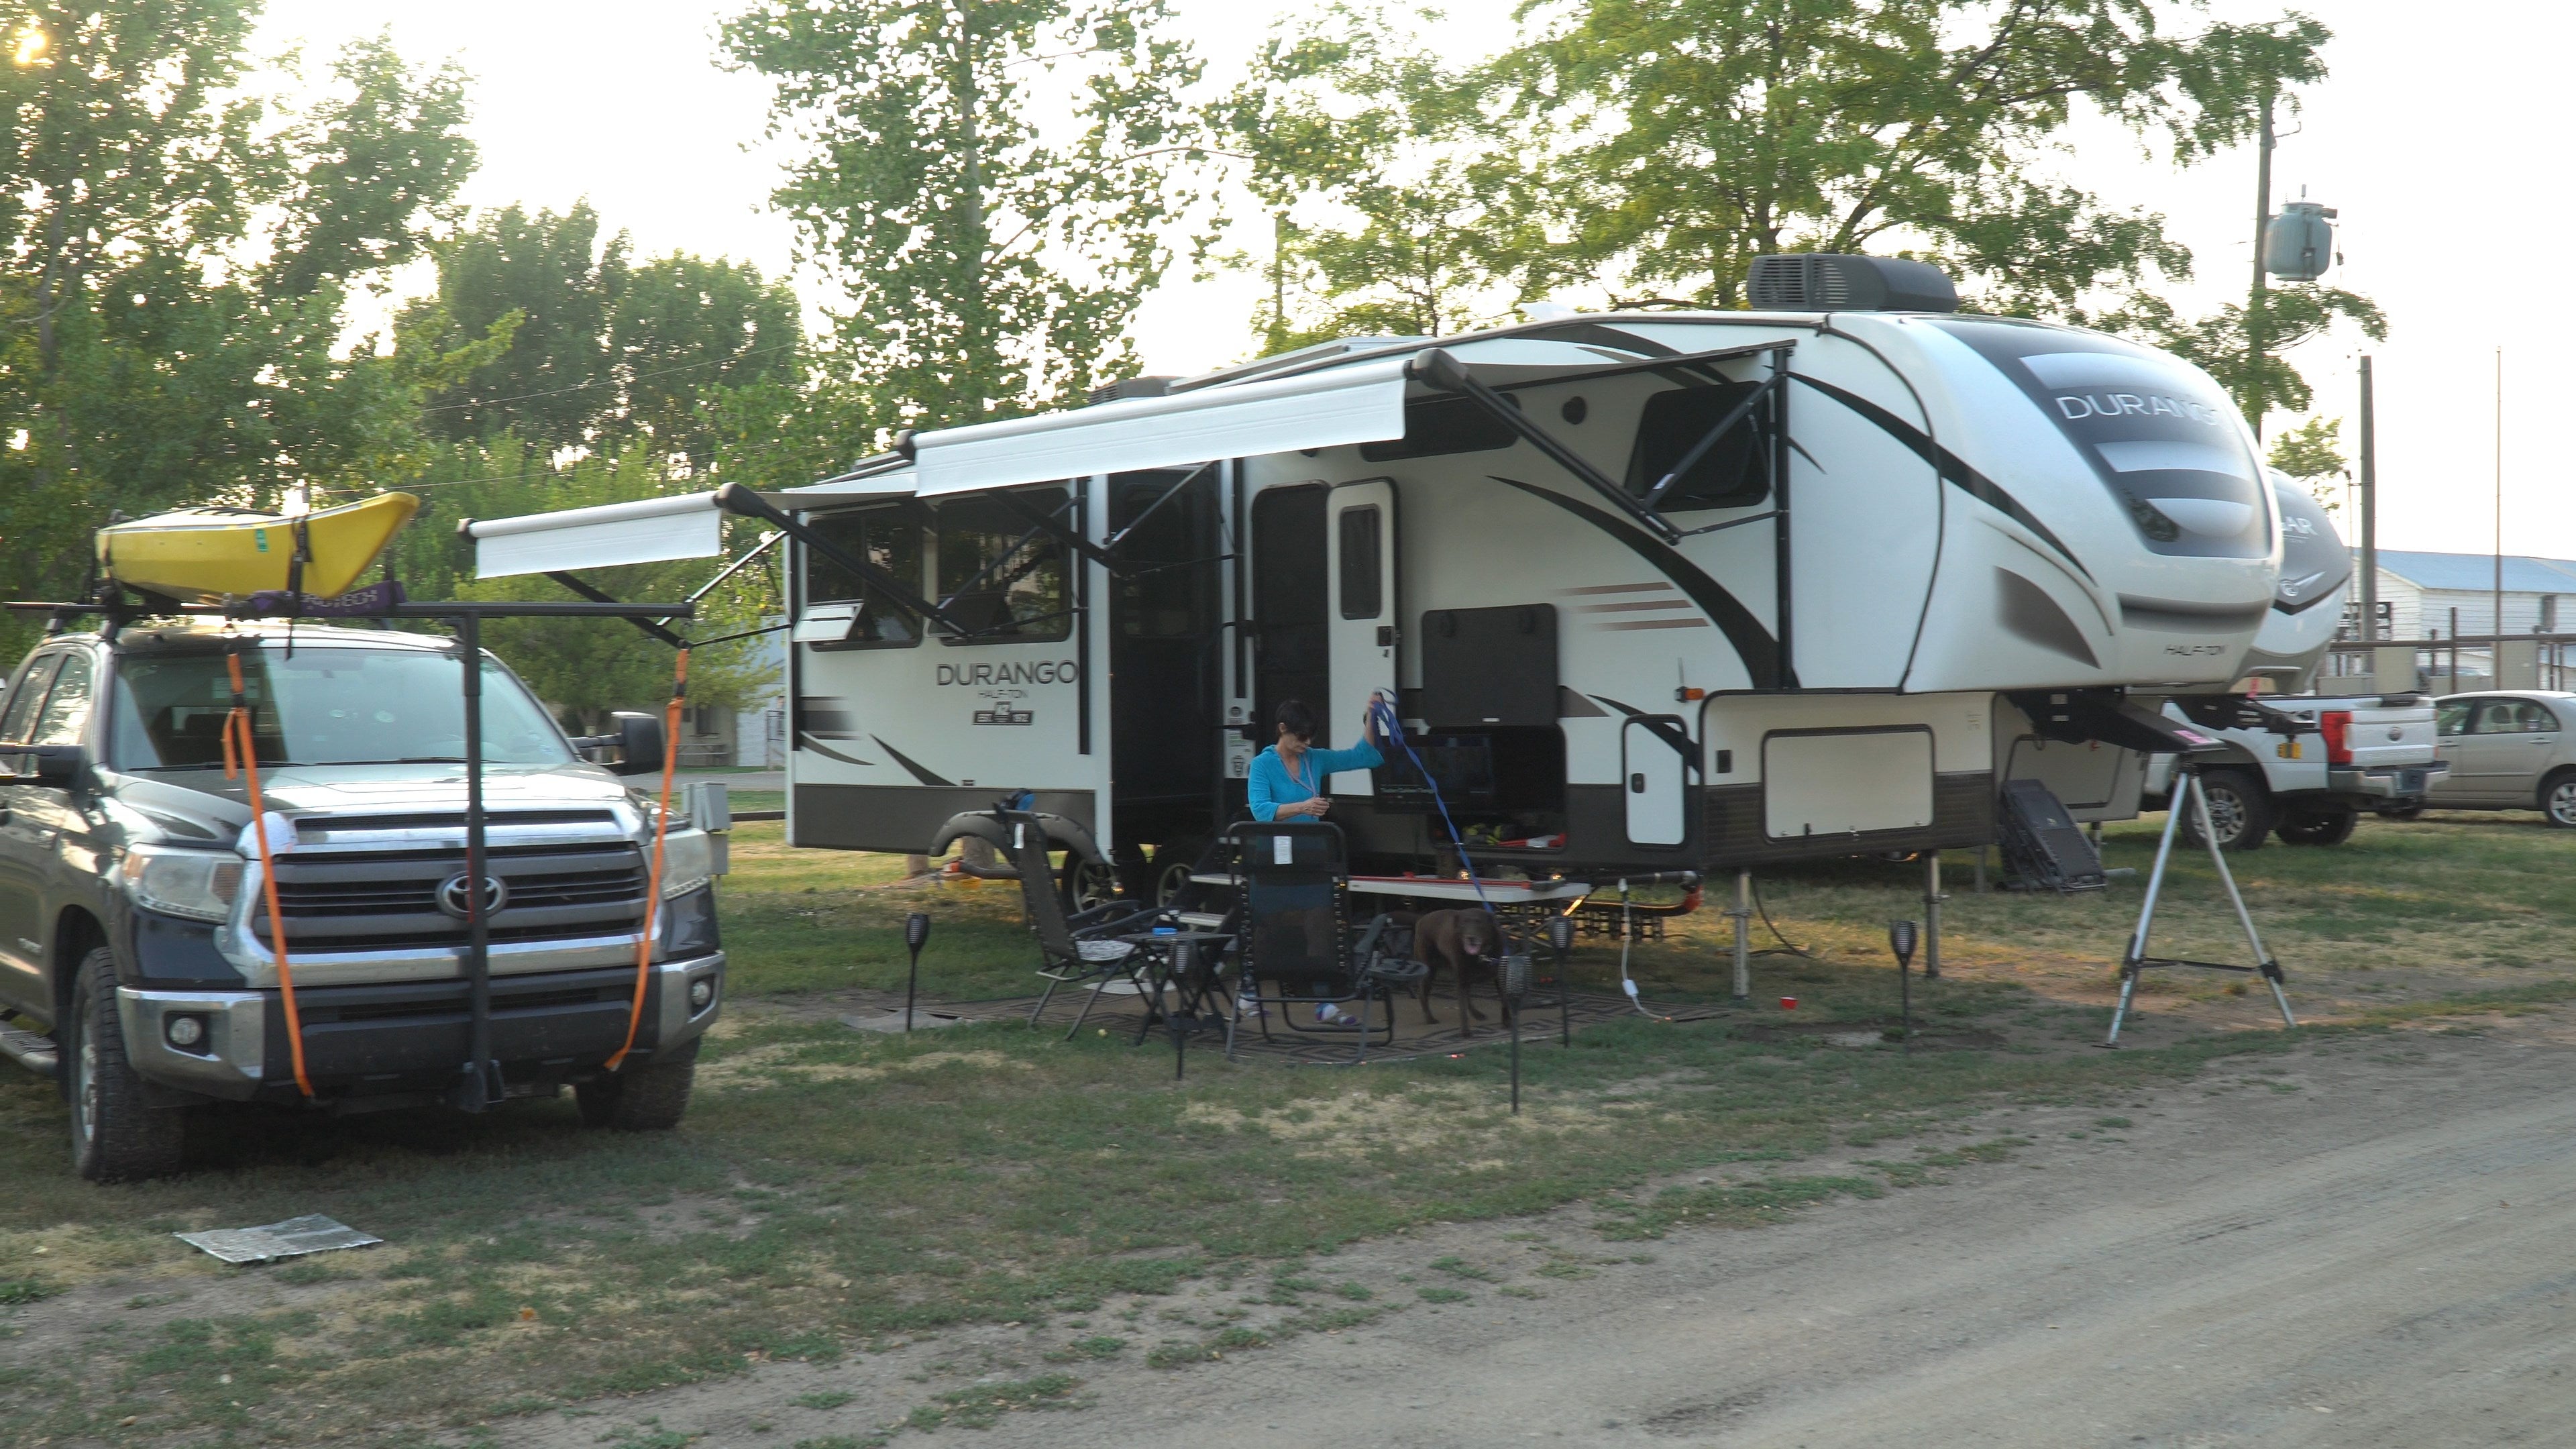 Camper submitted image from Twin Falls County Fairgrounds - 4